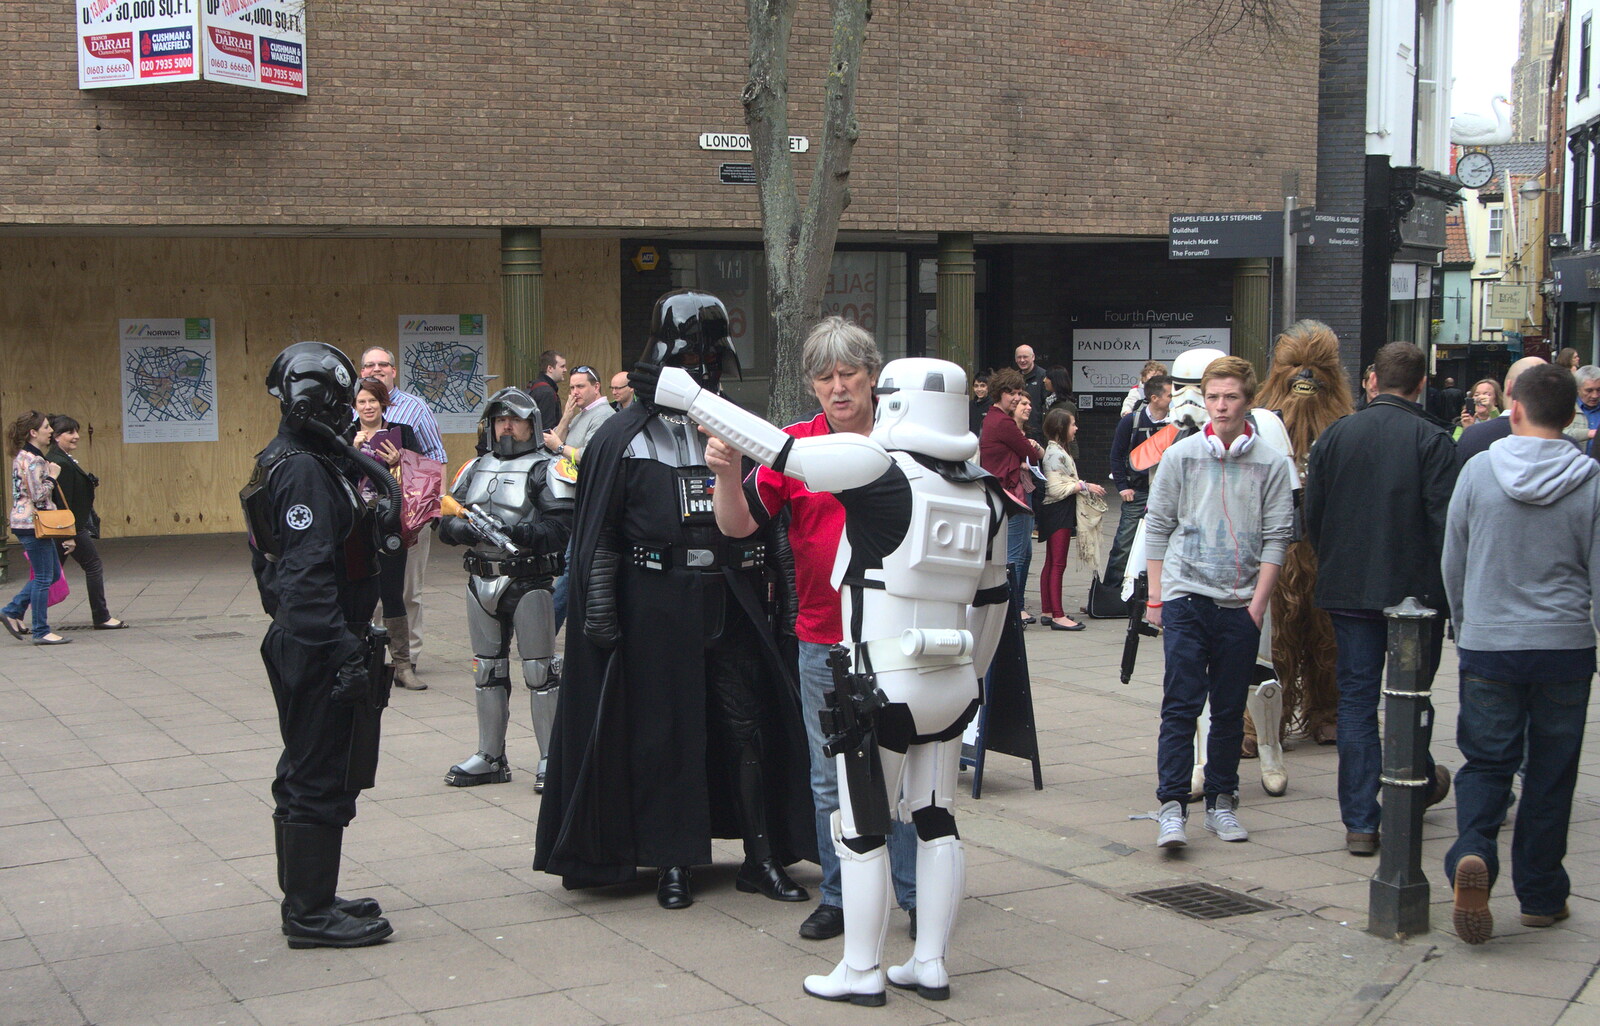 Darth Vader and minions assemble on London Street from A Very Random Norwich Day, and The BBs at Laxfield, Norfolk and Suffolk - 13th April 2013